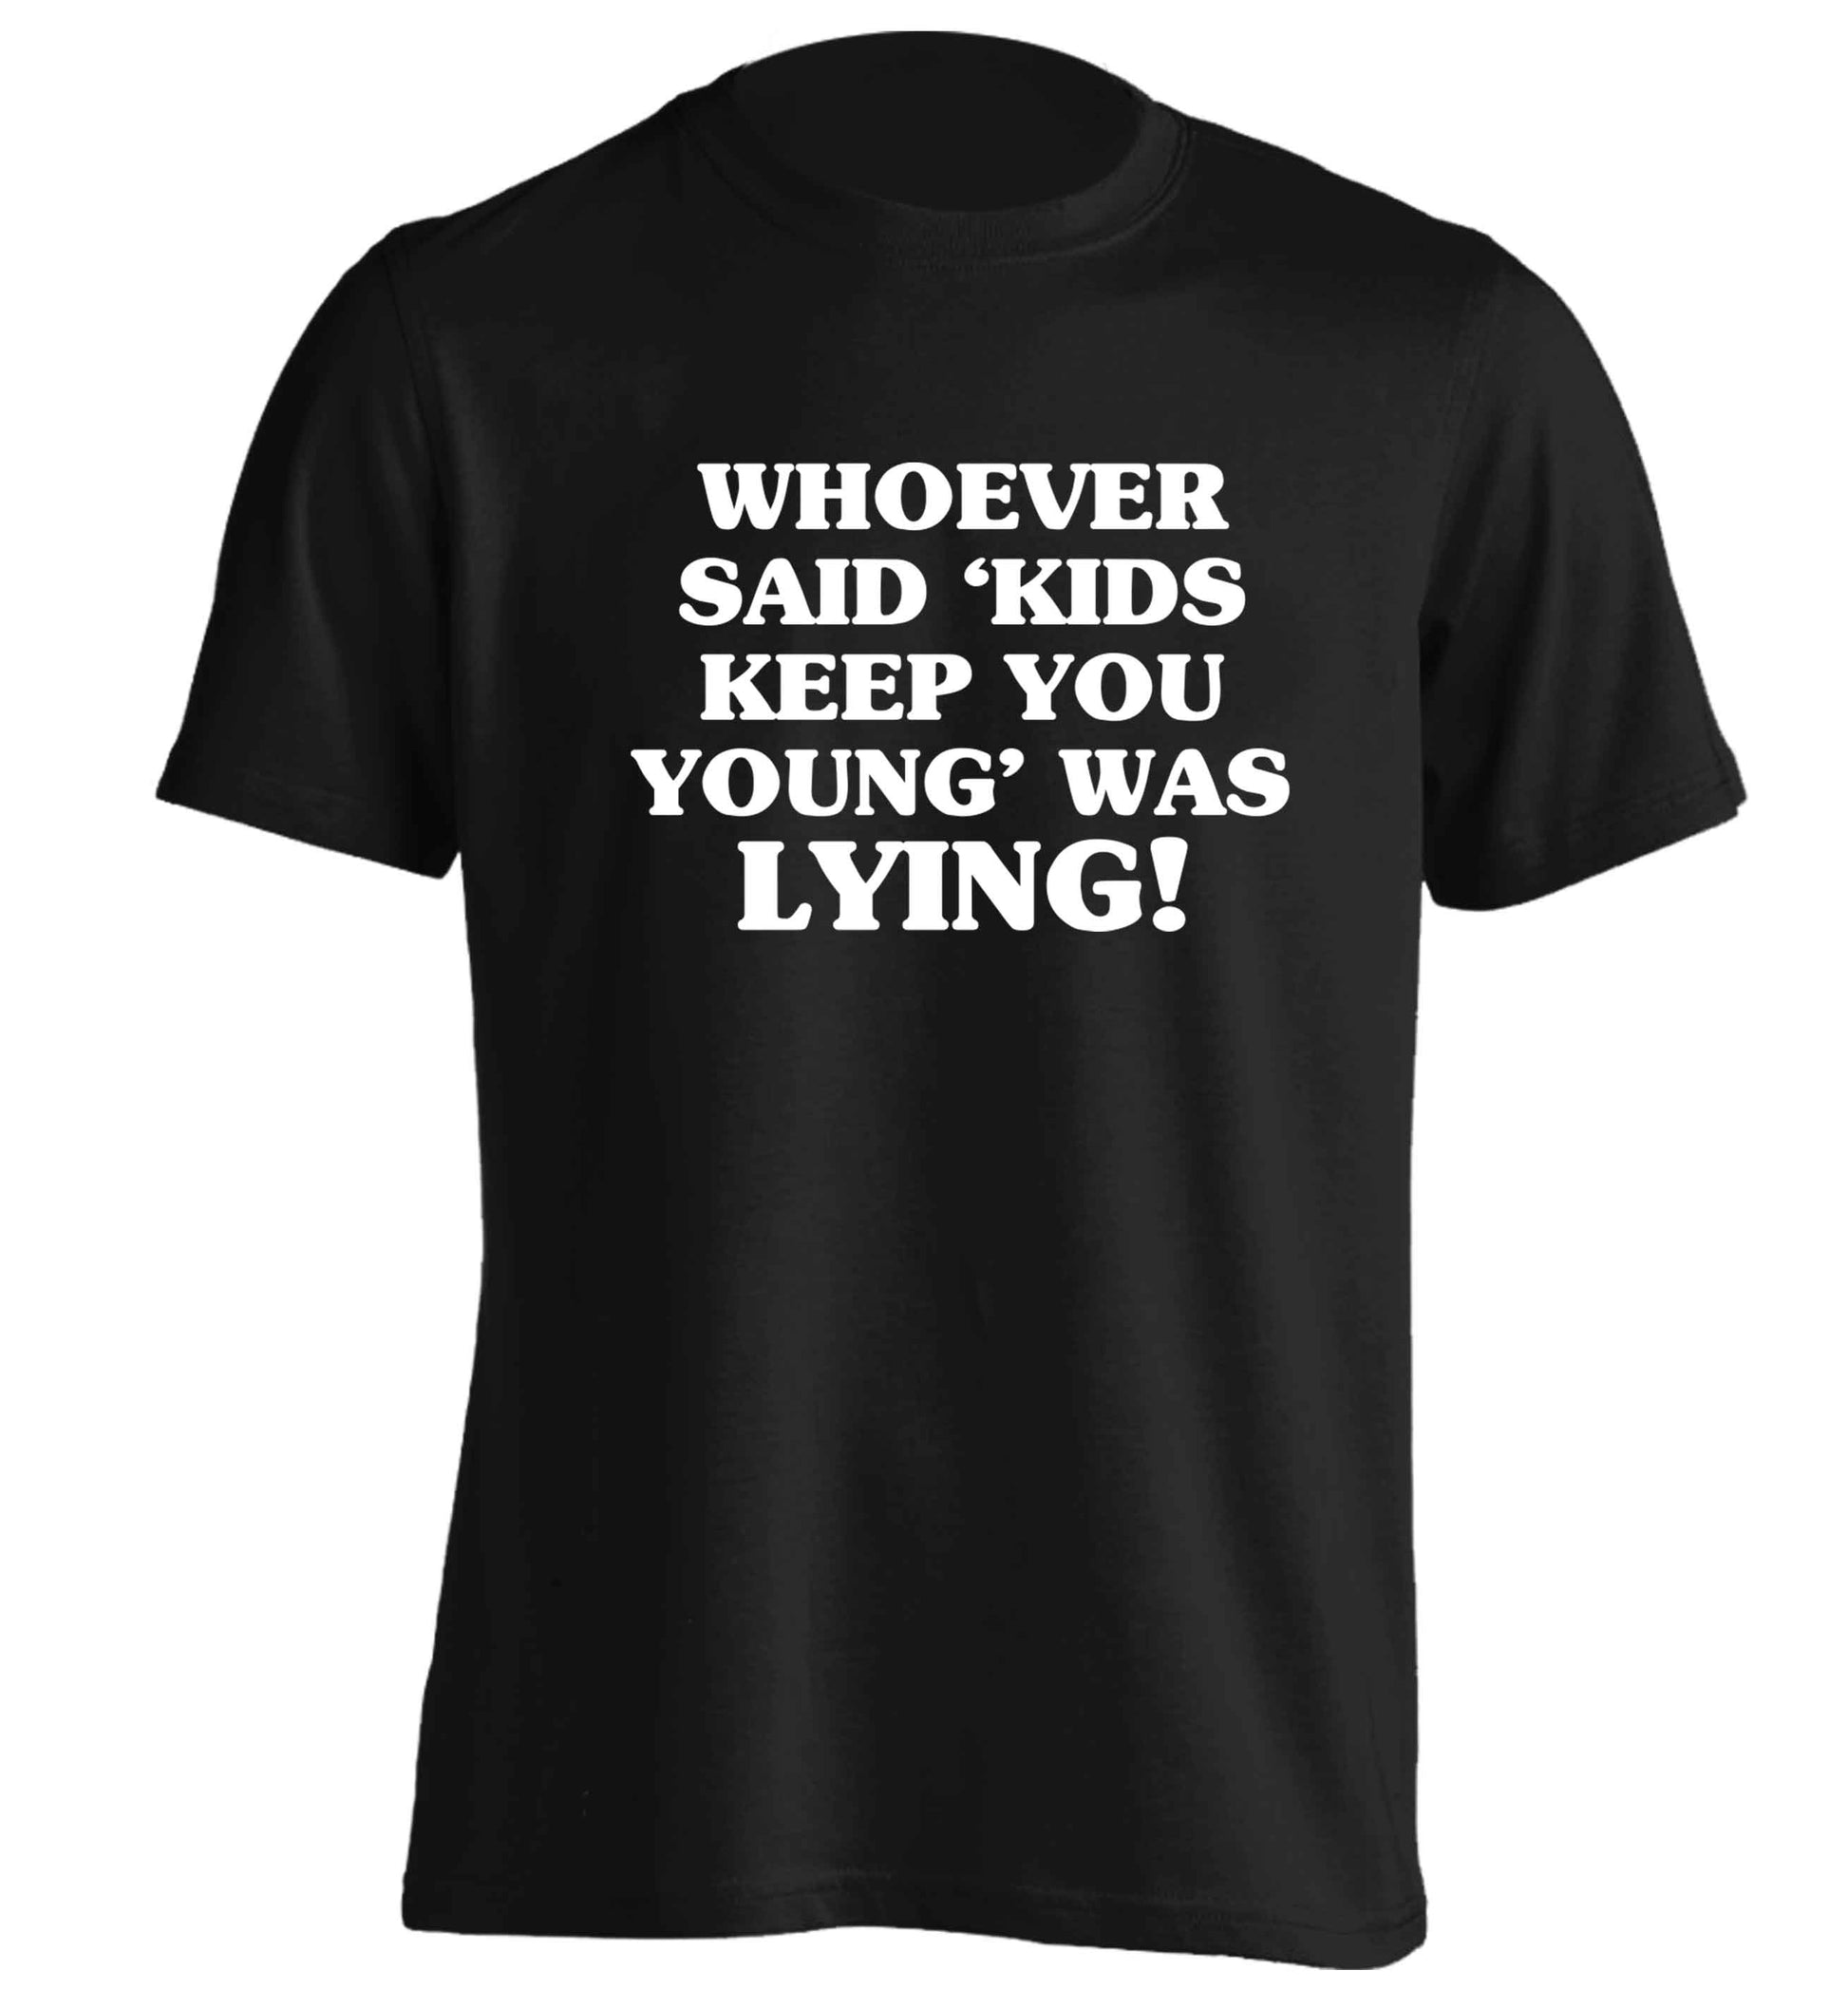 Whoever said 'kids keep you young' was lying! adults unisex black Tshirt 2XL